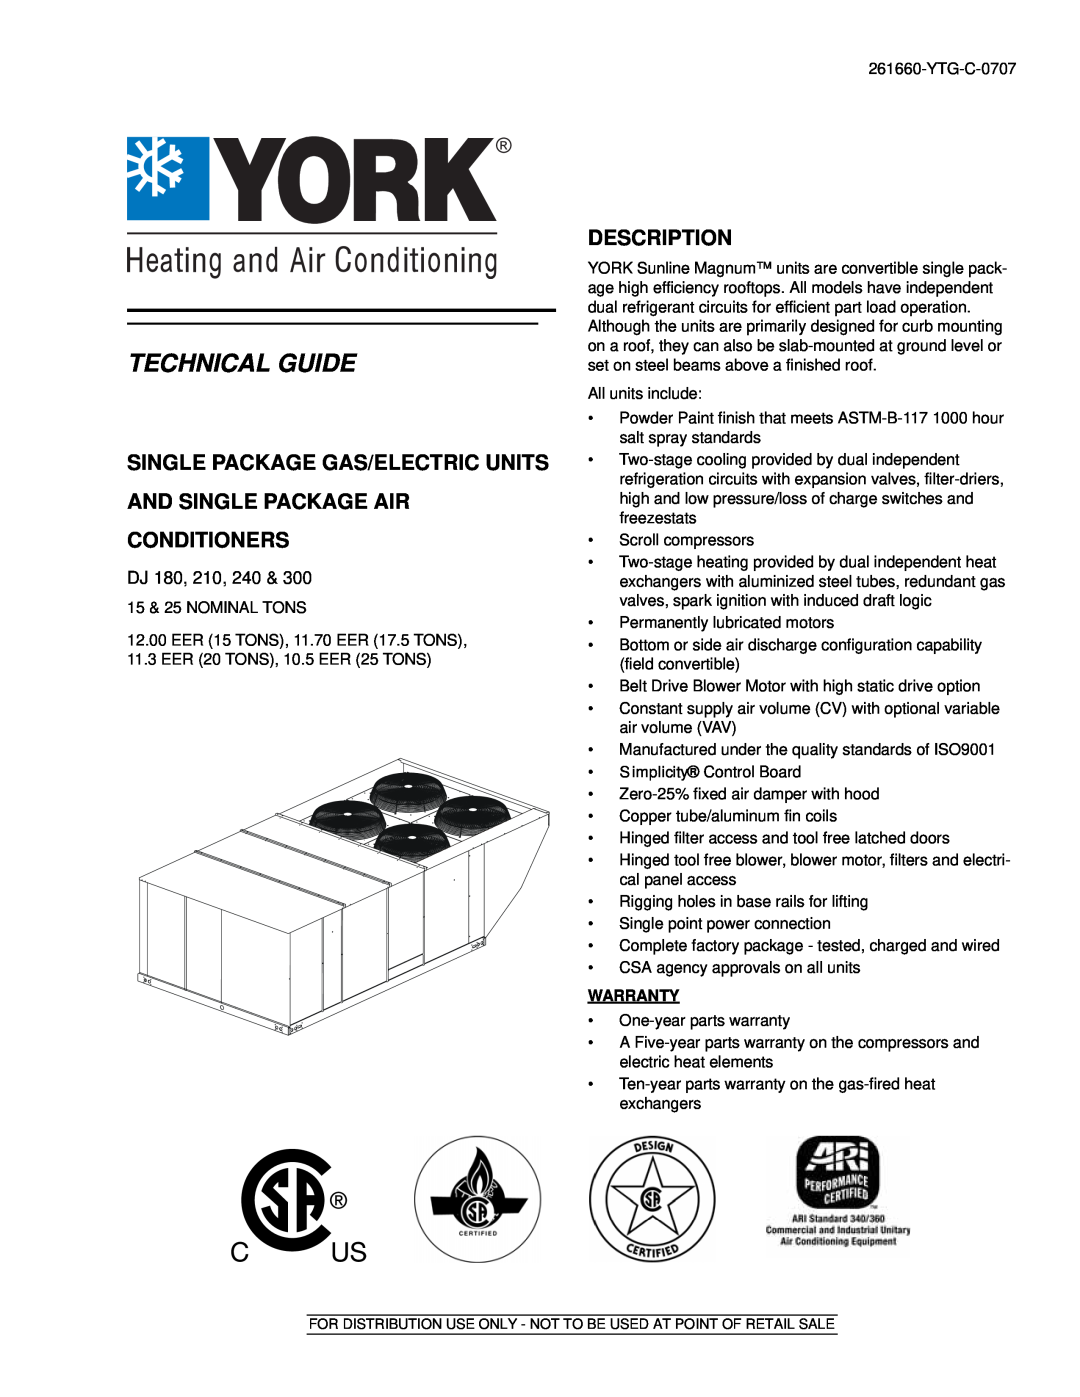 York DJ 180 warranty Single Package Gas/Electric Units, And Single Package Air Conditioners, Description, Technical Guide 